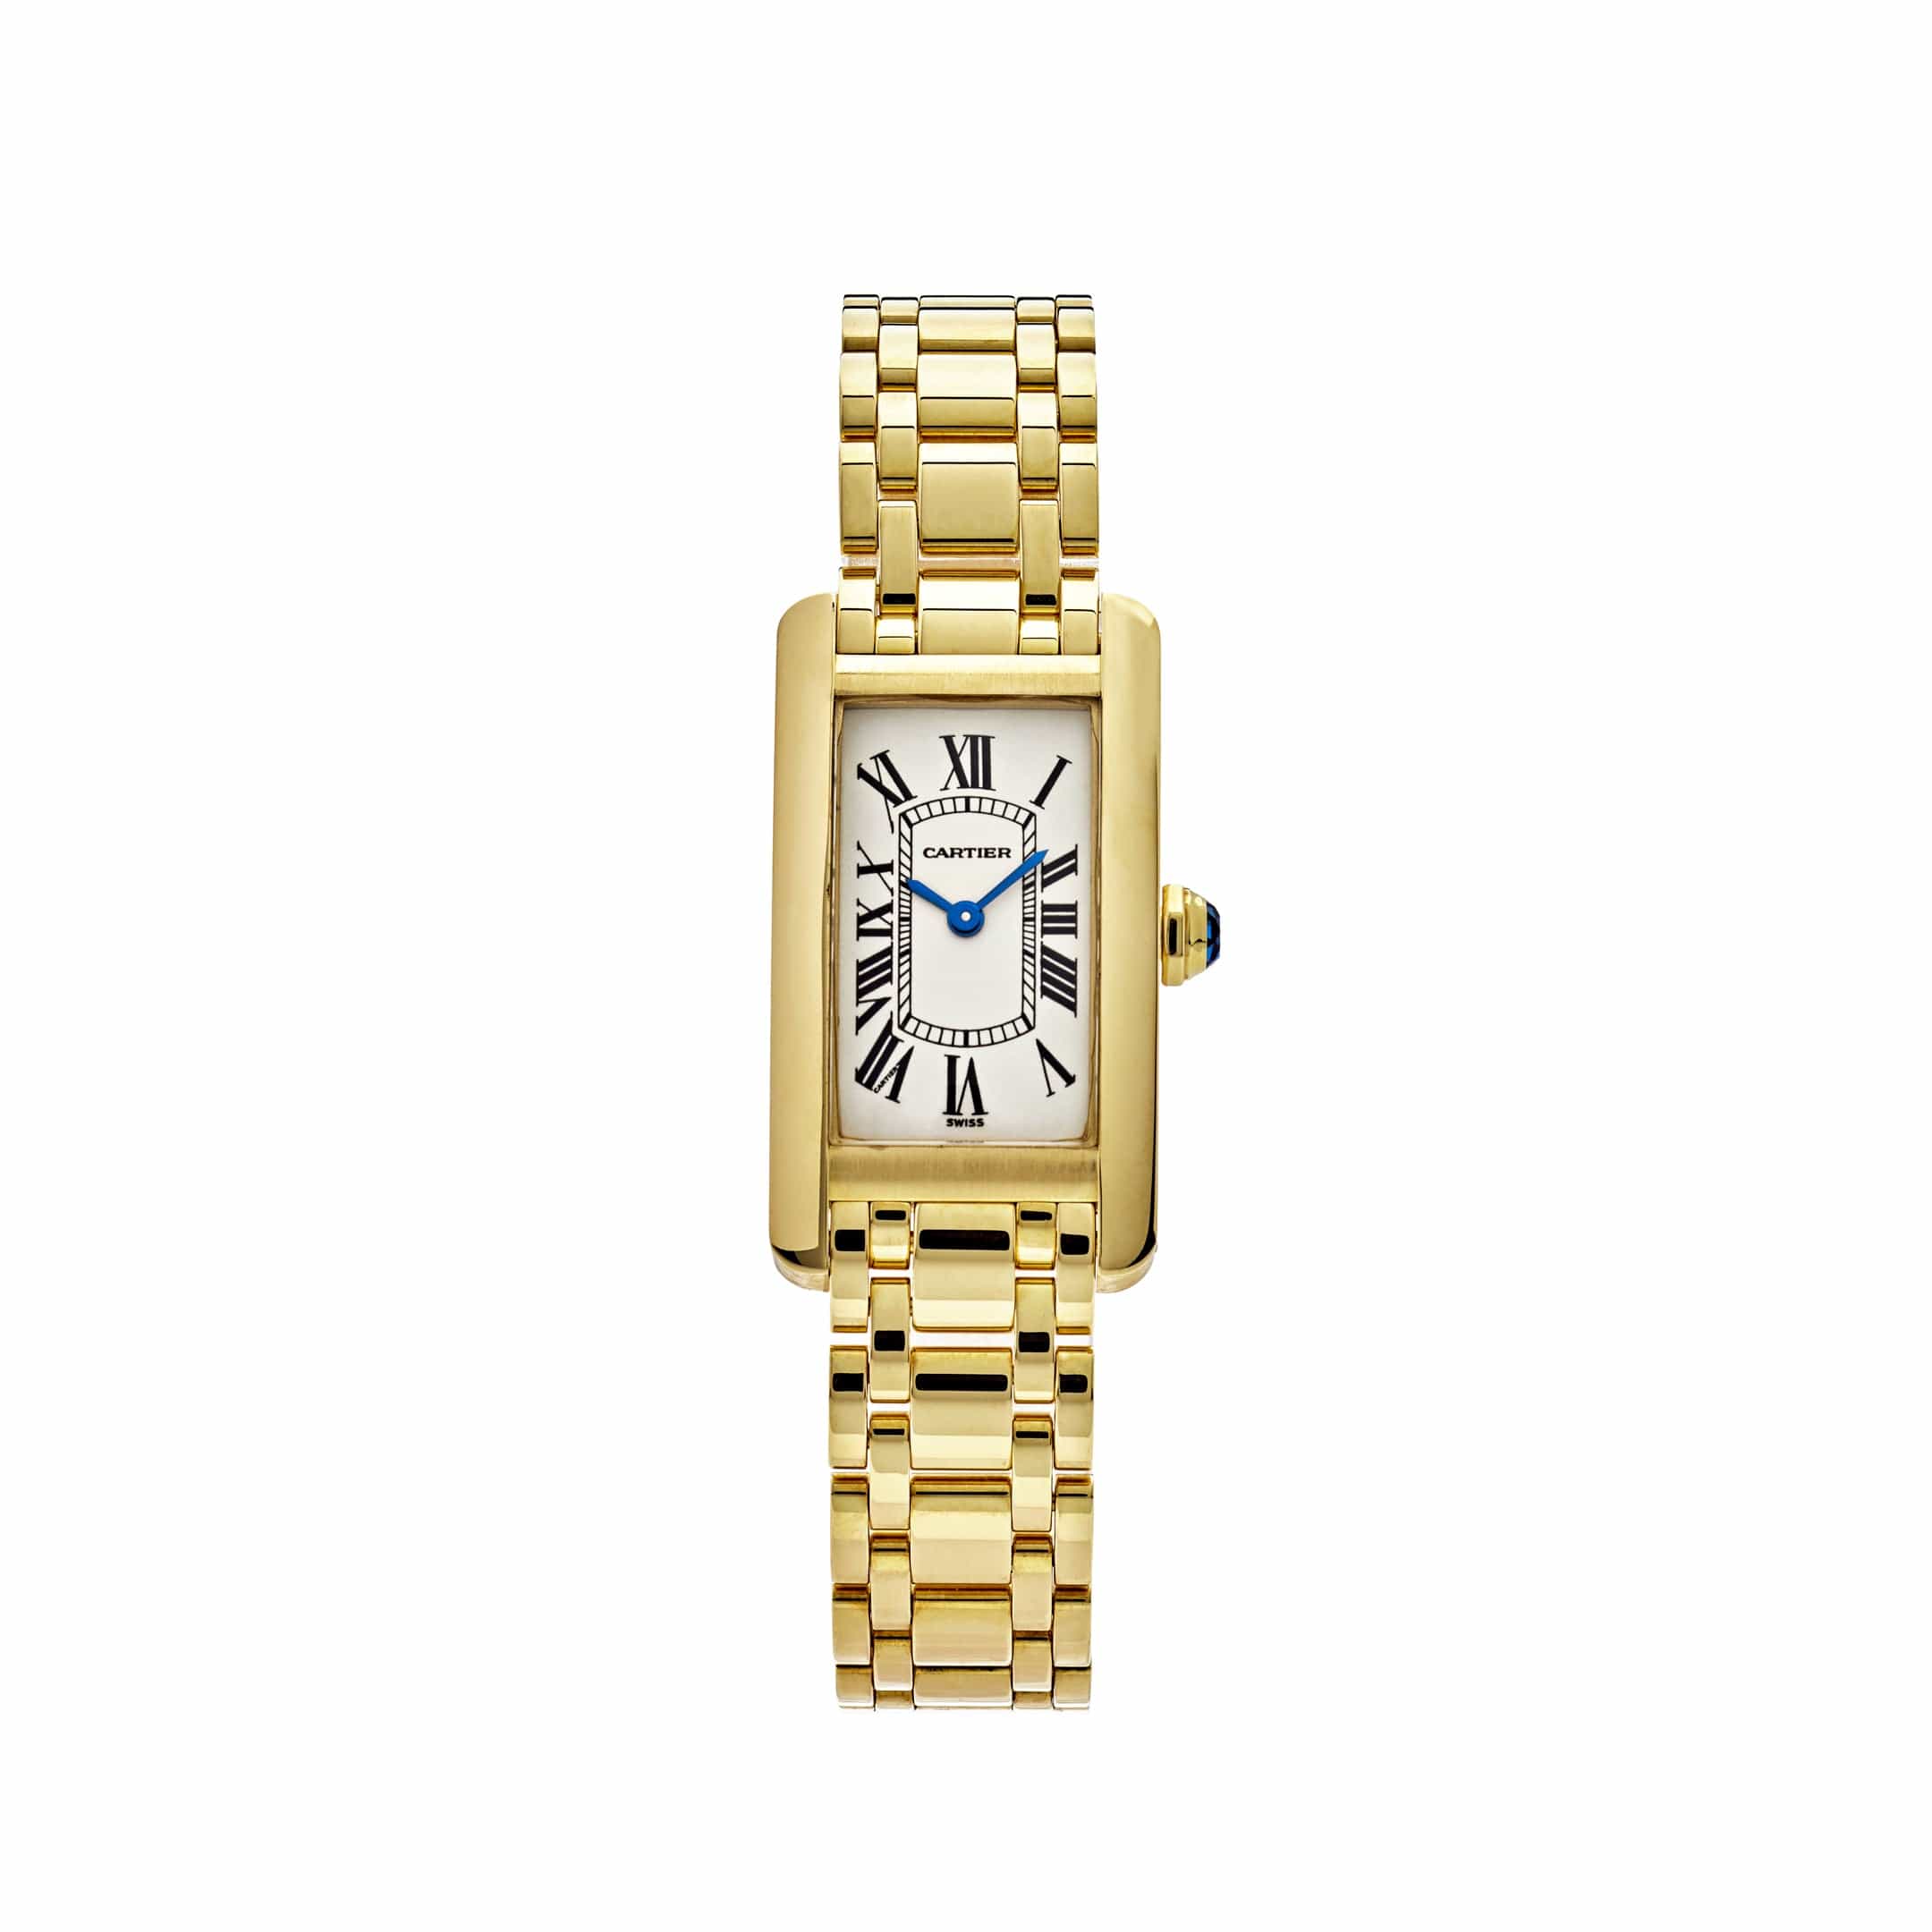 Collector's Corner - The iconic Cartier Tank Américaine